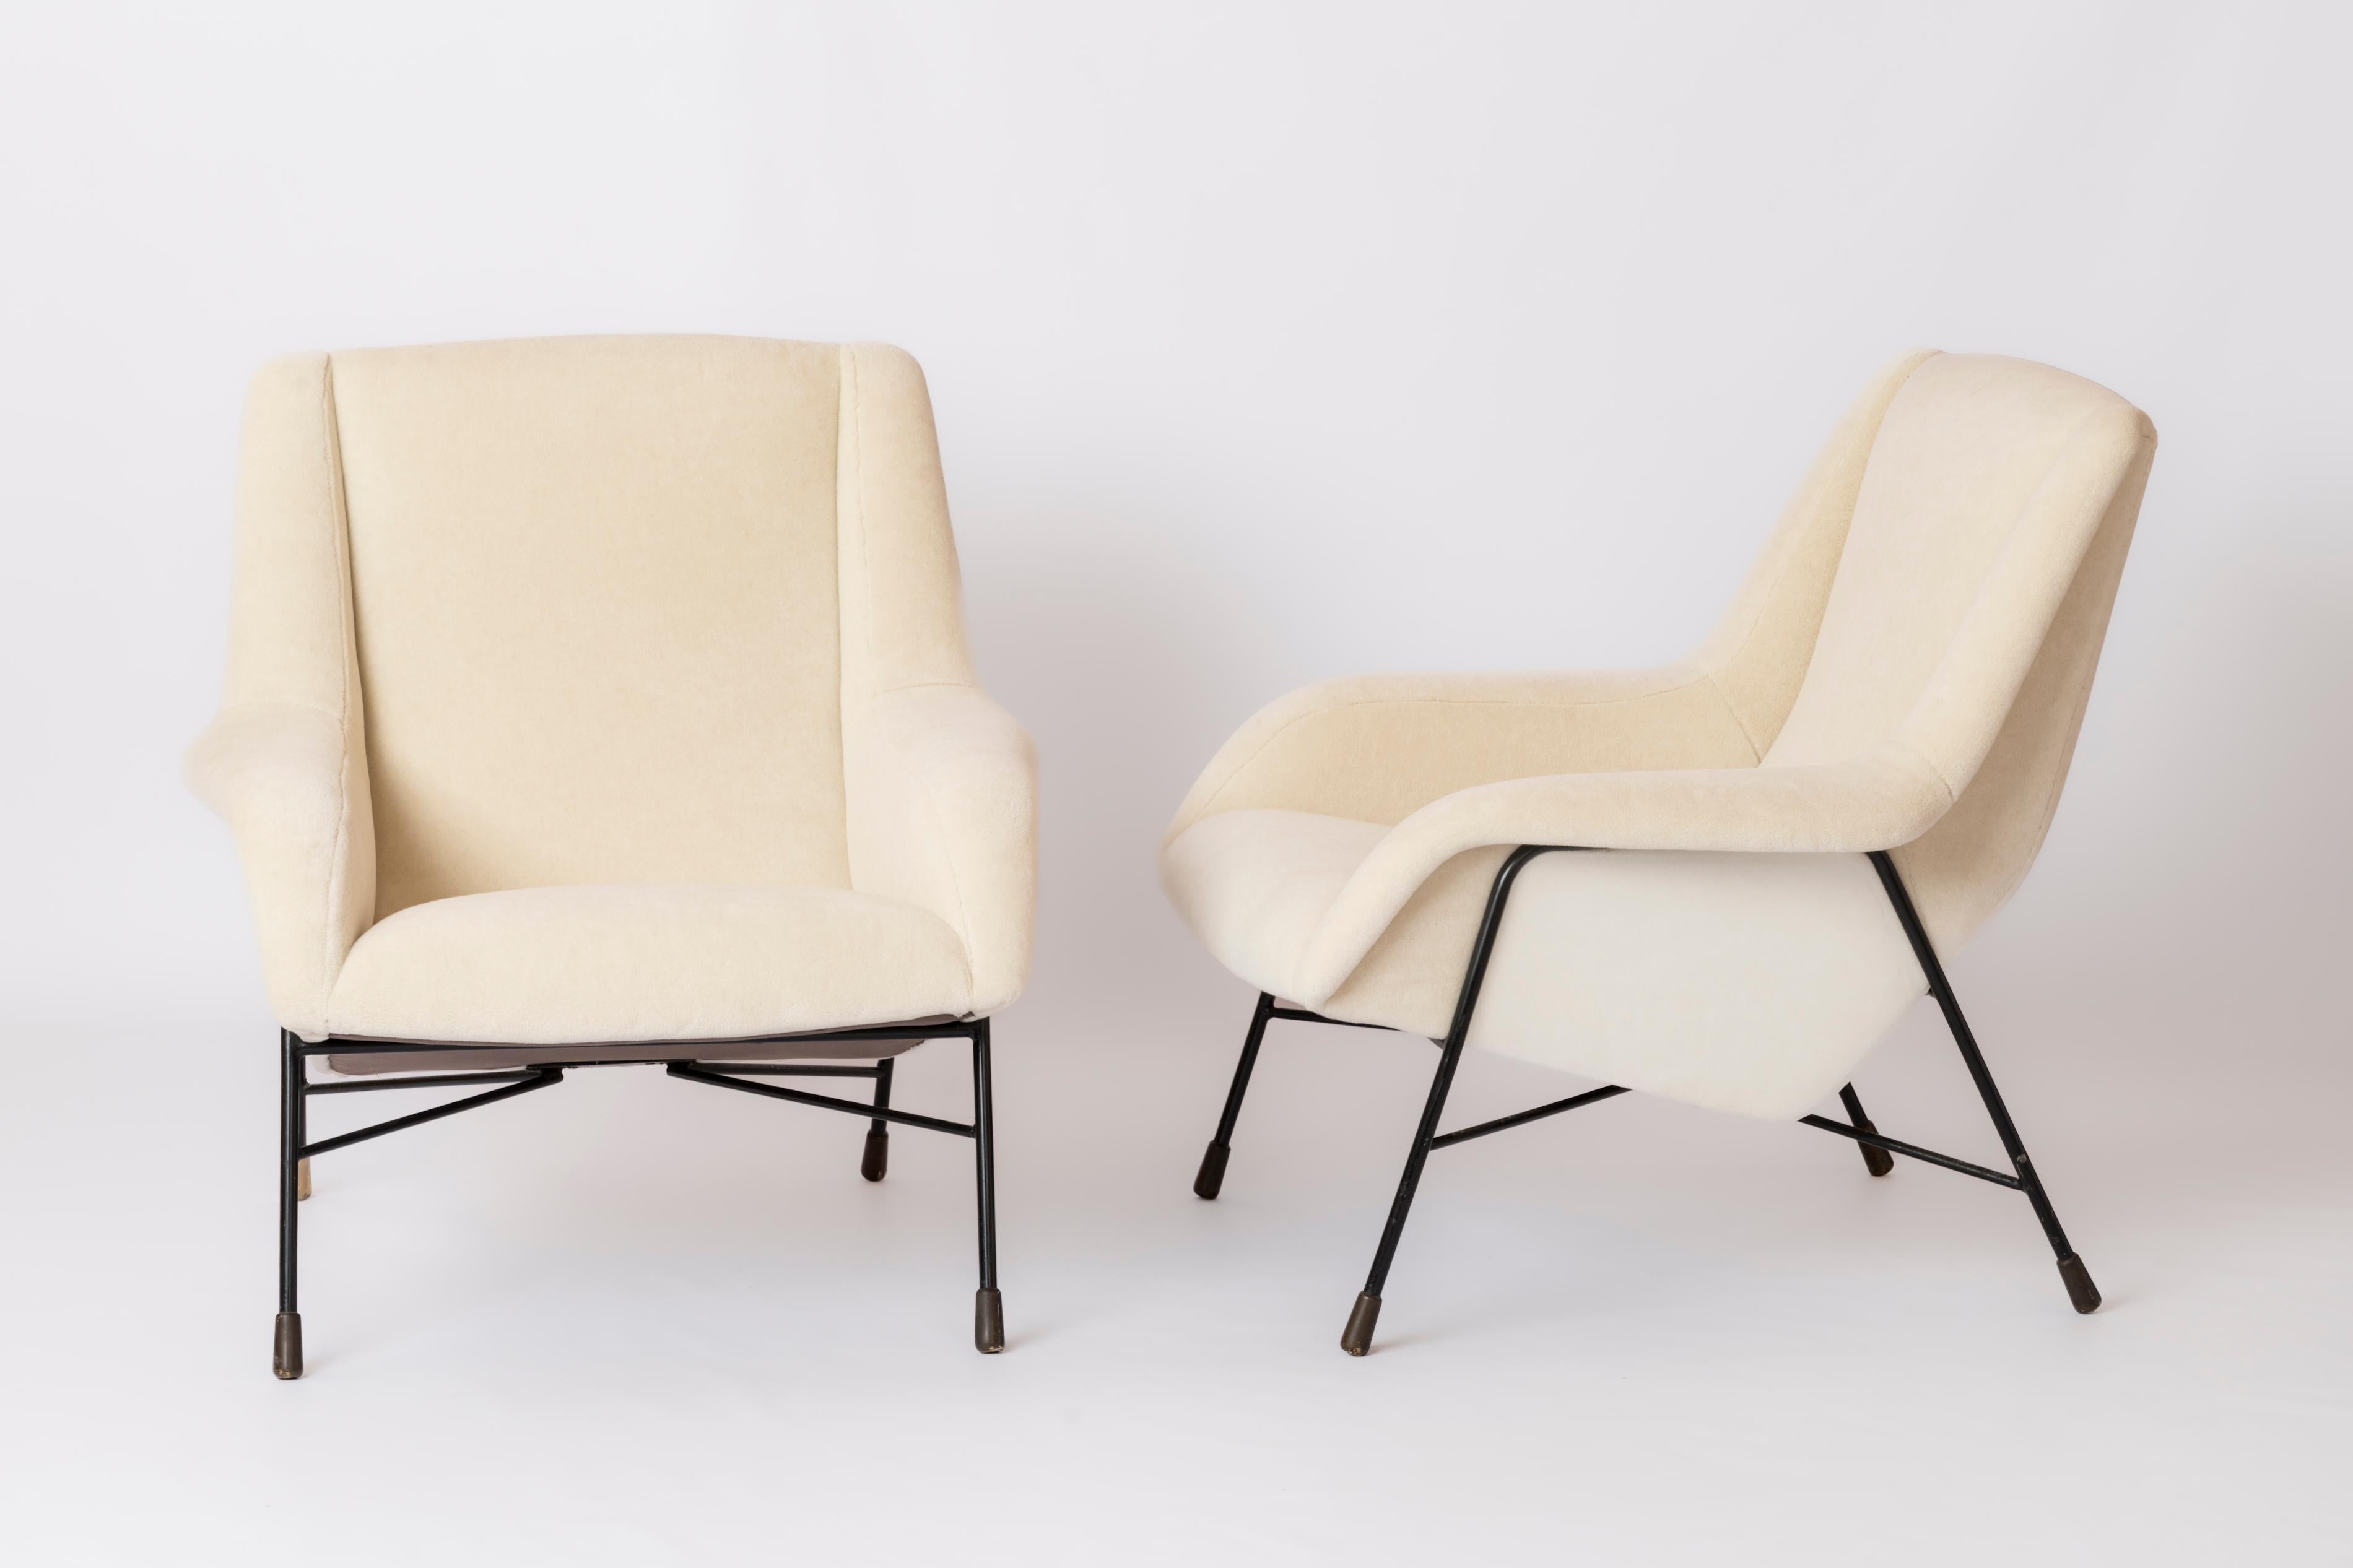 Belgian Pair of Cream Mohair Armchairs by Alfred Hendrickx for Belform - Belgium, 1958 For Sale